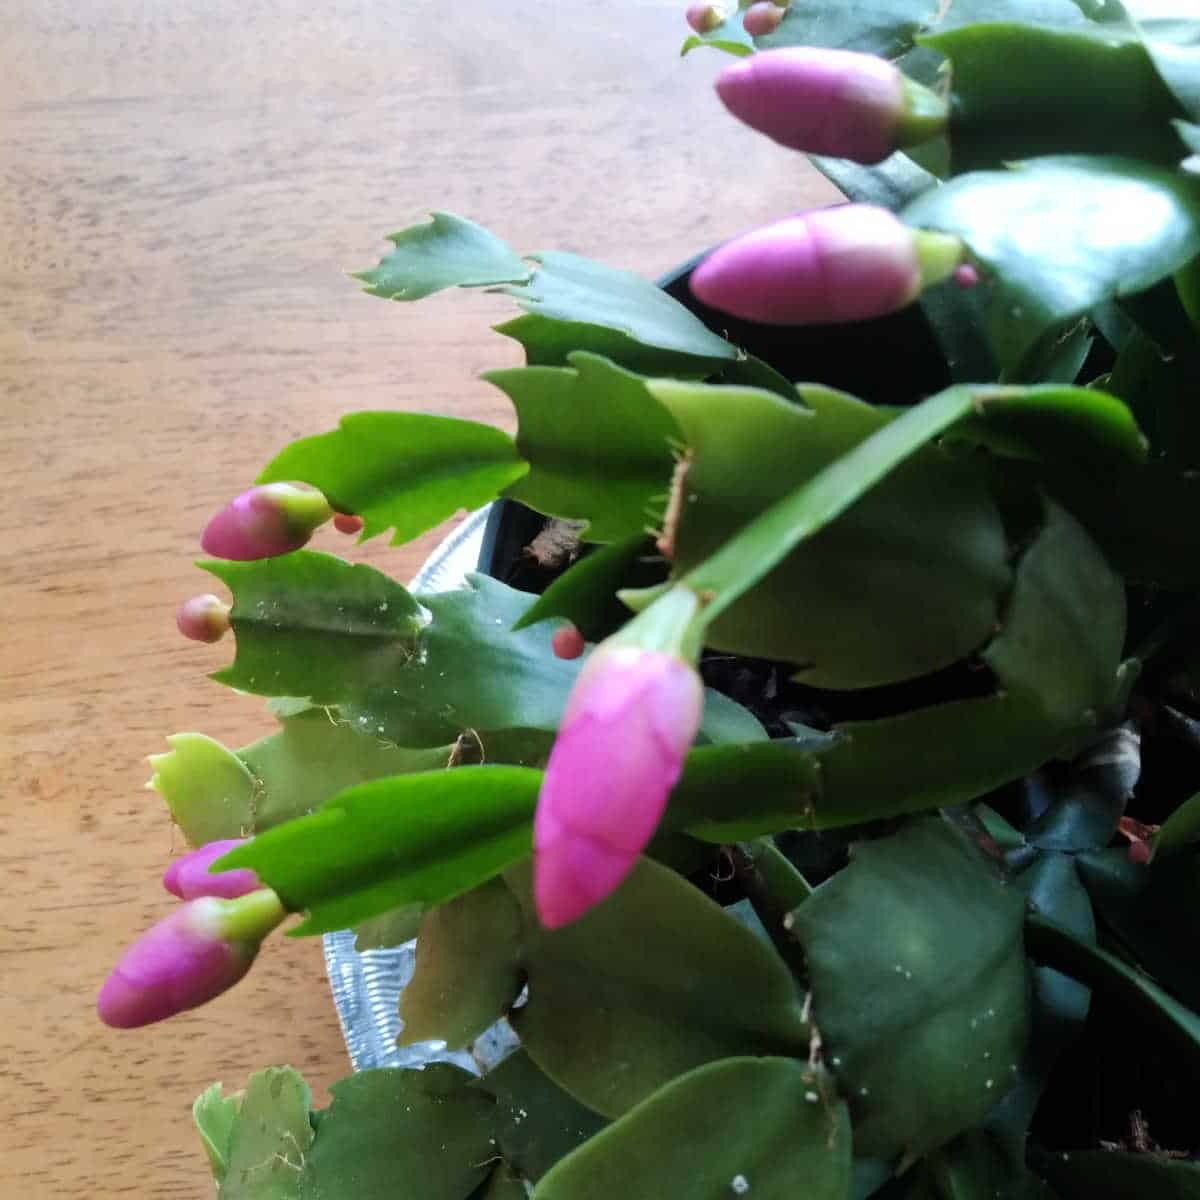 a close up of a pink Christmas cactus flower on a wooden table